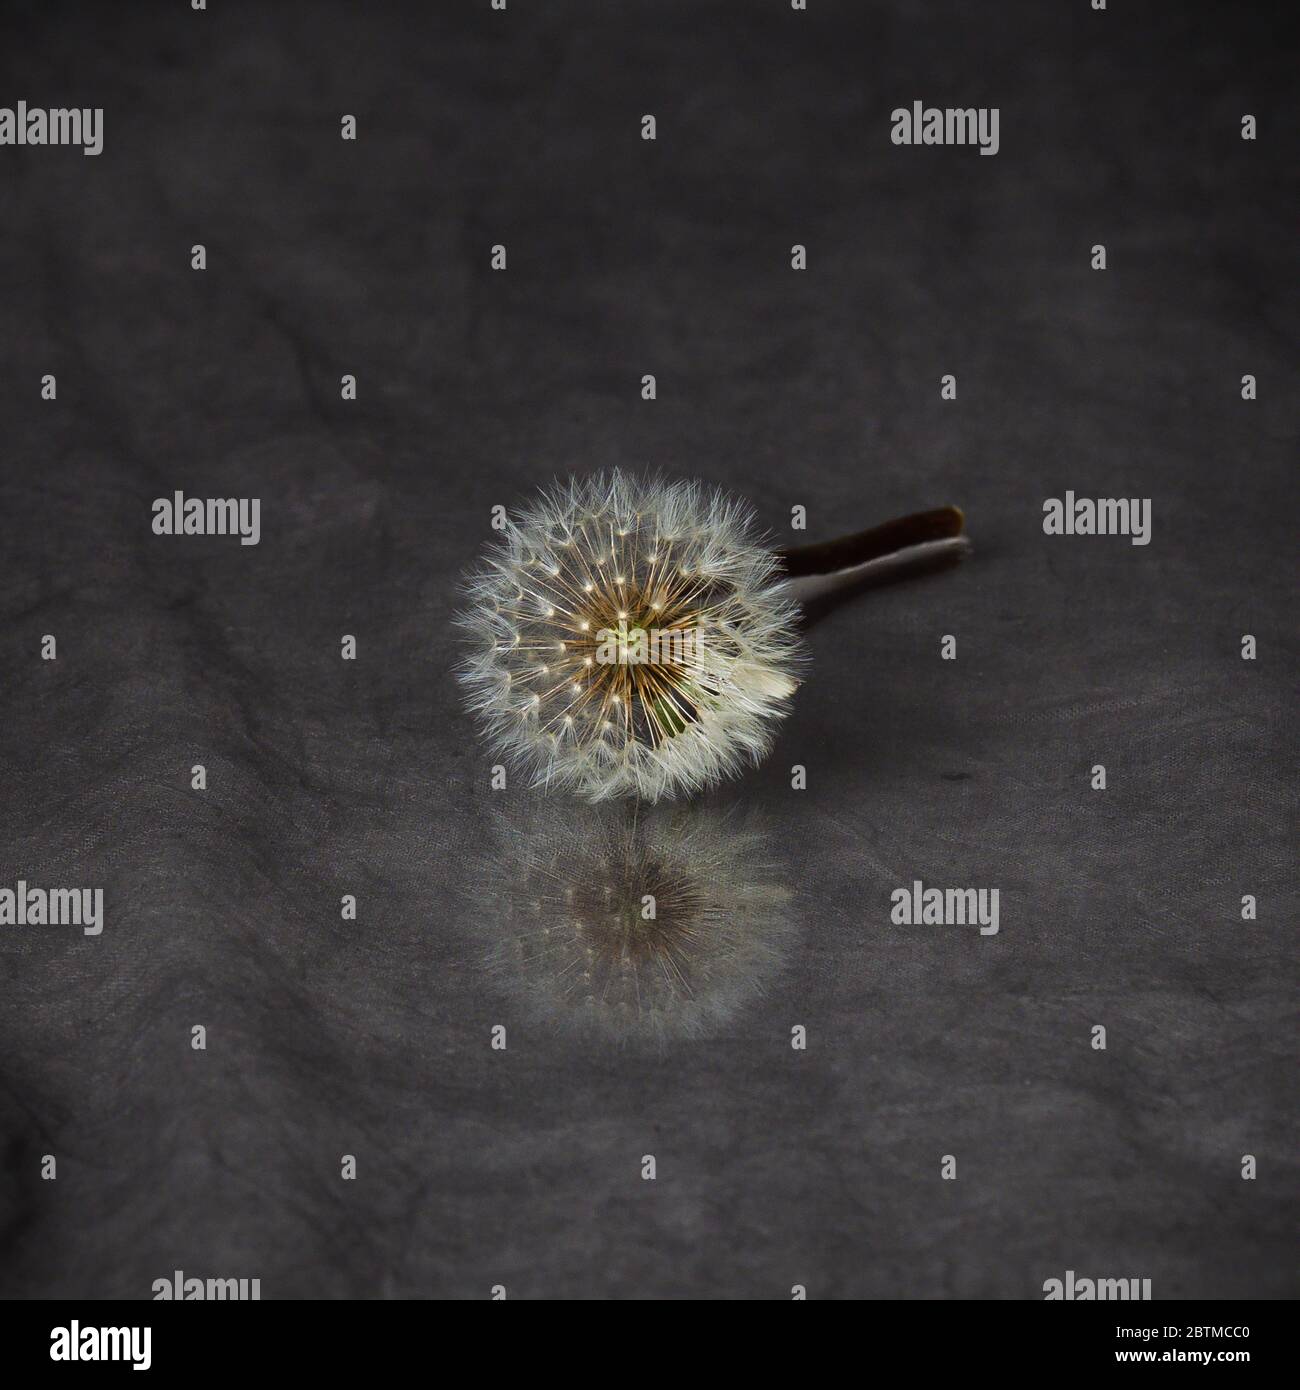 Dandelion Flower Weed Close Up Photograph in Photography Studio Portrait Essex England Stock Photo